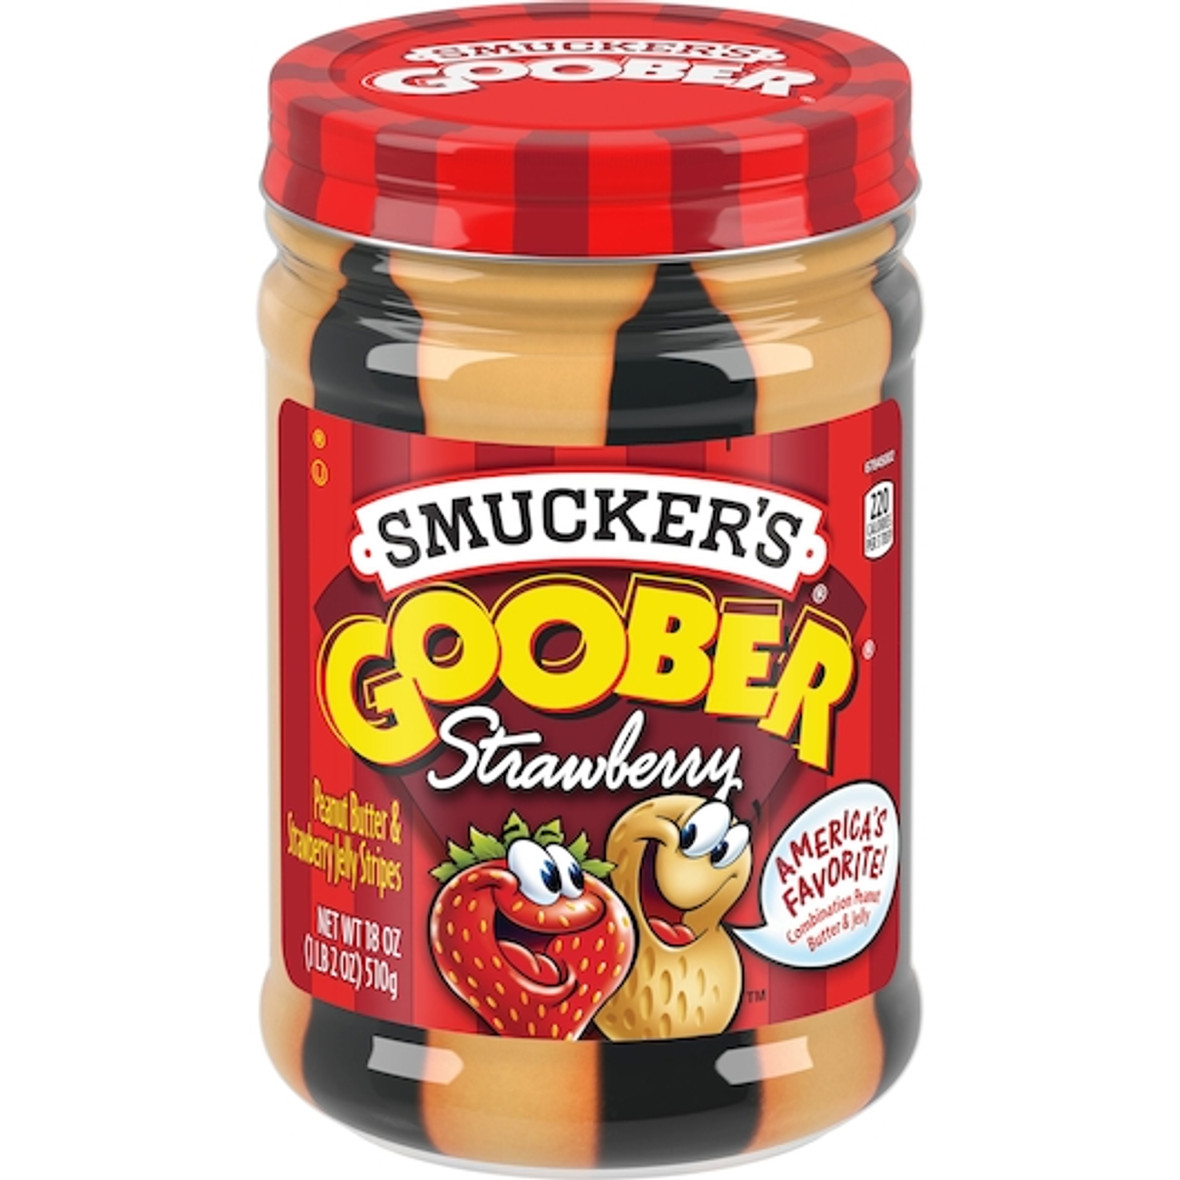 Smucker s Goober Strawberry Jelly And Peanut Butter, 18 Ounces, 12 Per Case